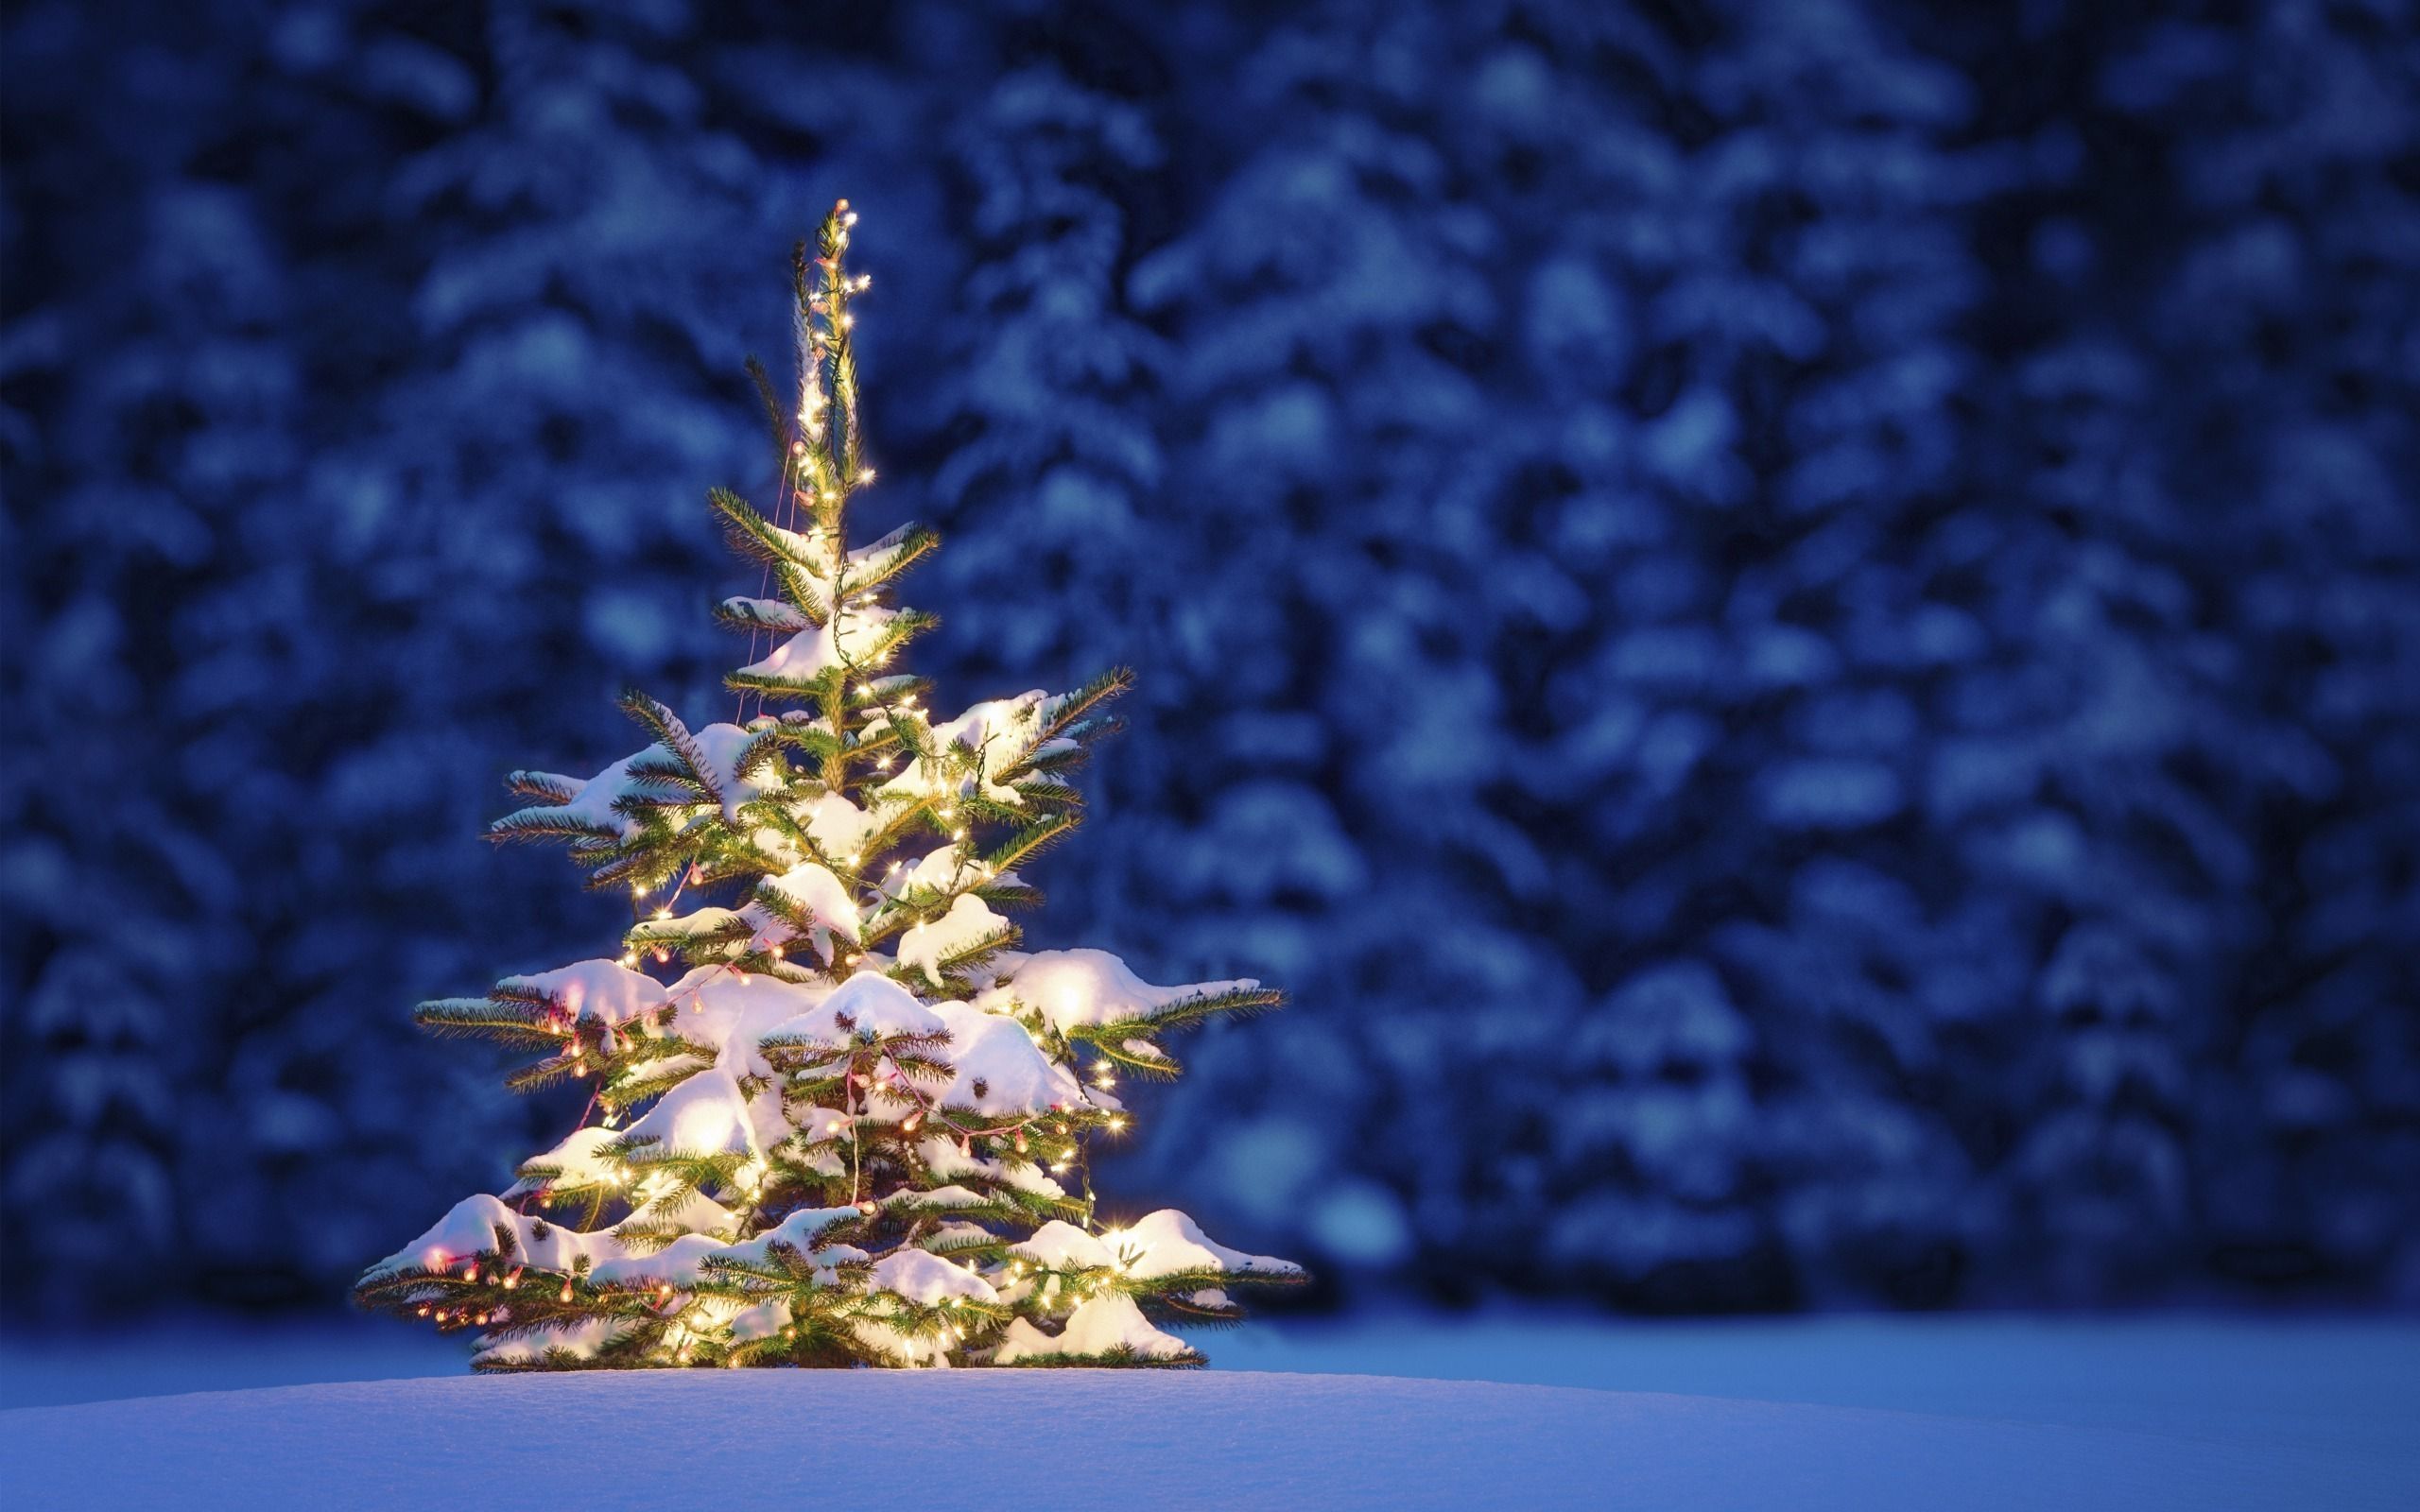 Where to pick up the perfect Christmas tree?